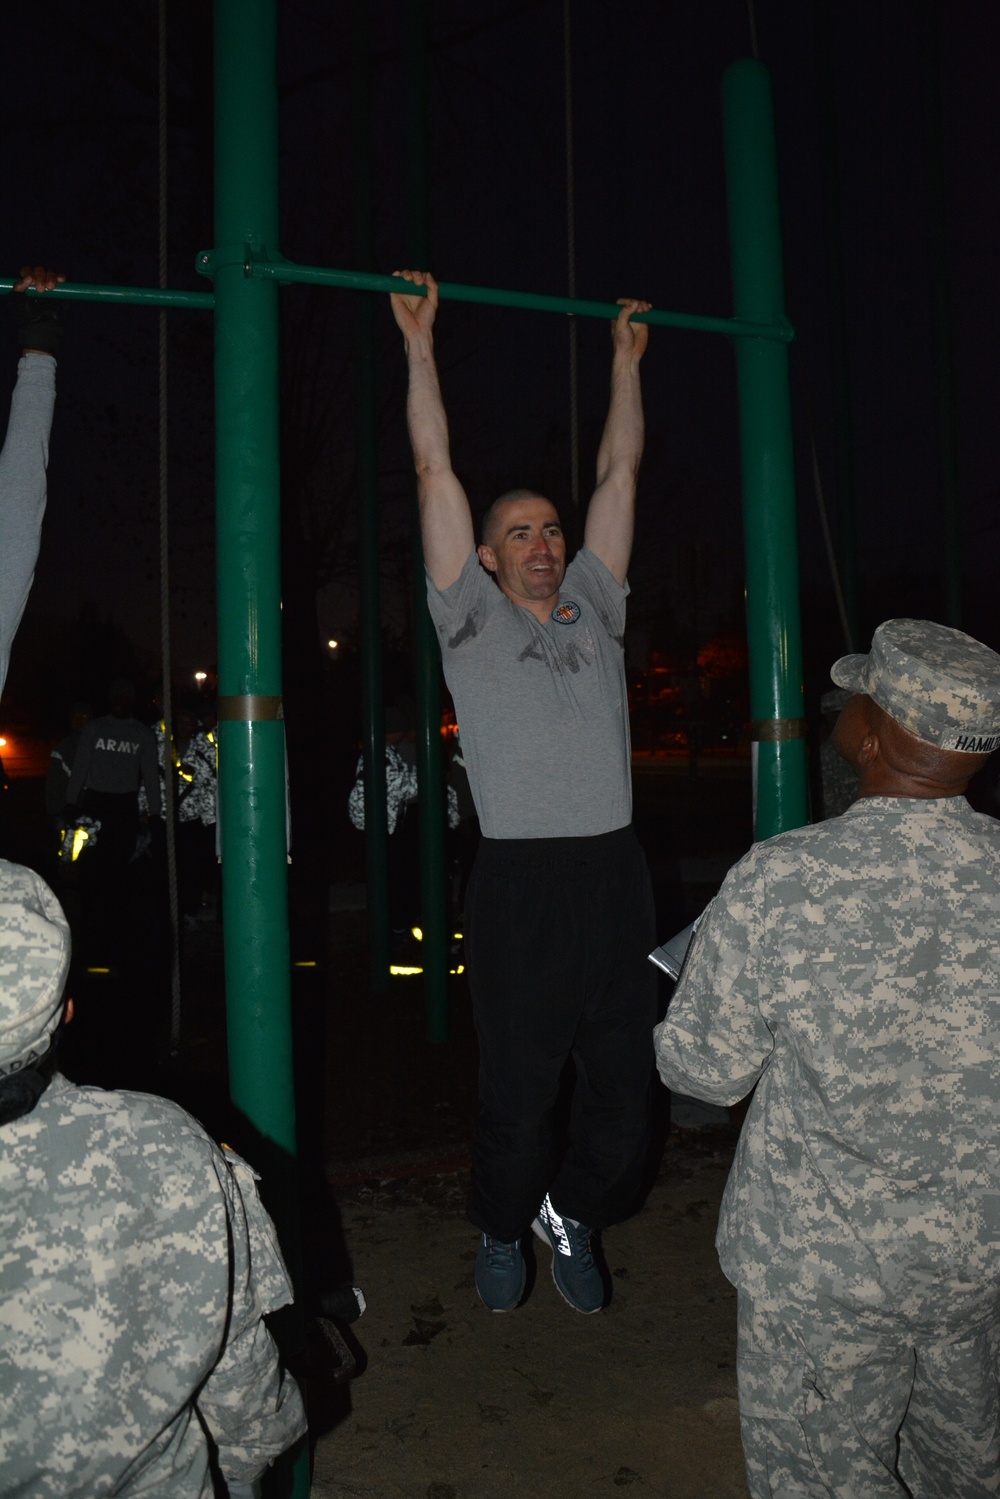 210th Fires Brigade hosts Thunder Fitness Challenge